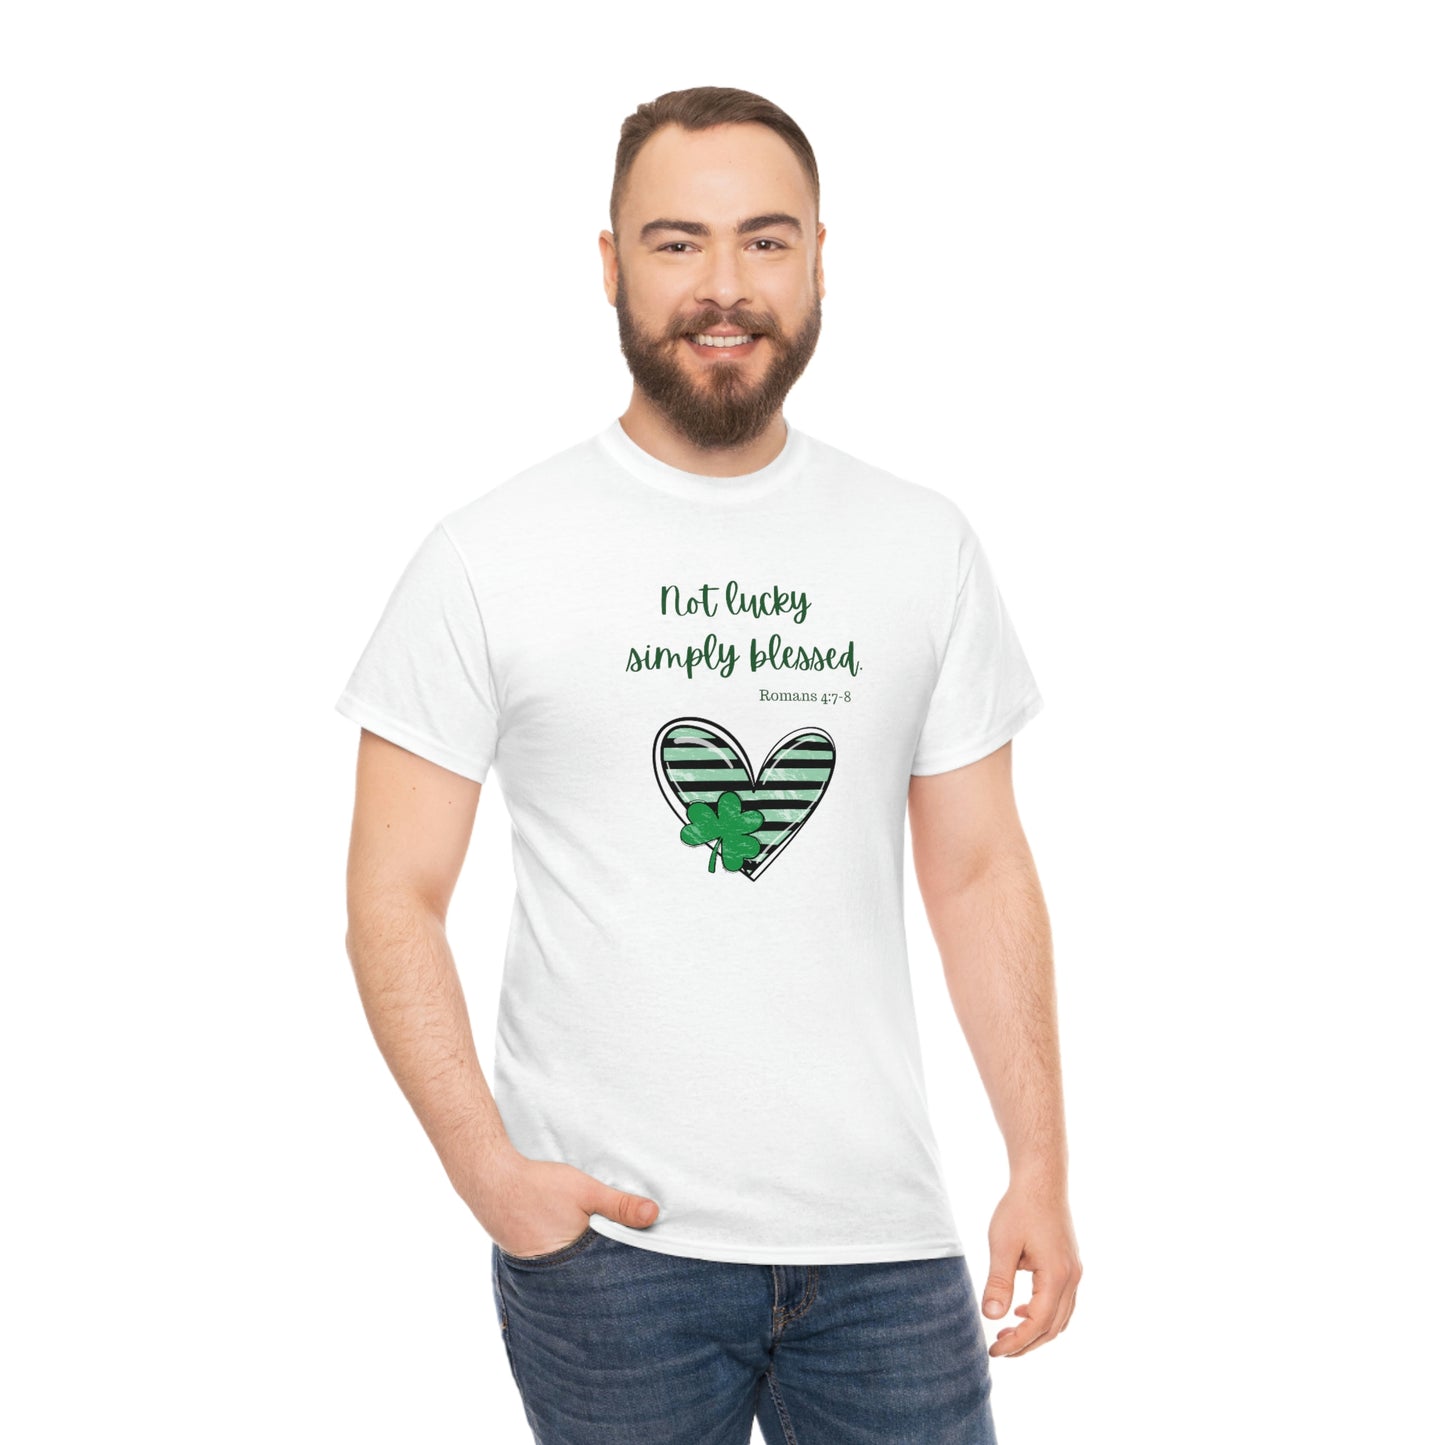 Not Lucky But Blessed Shirt for St Patricks Day